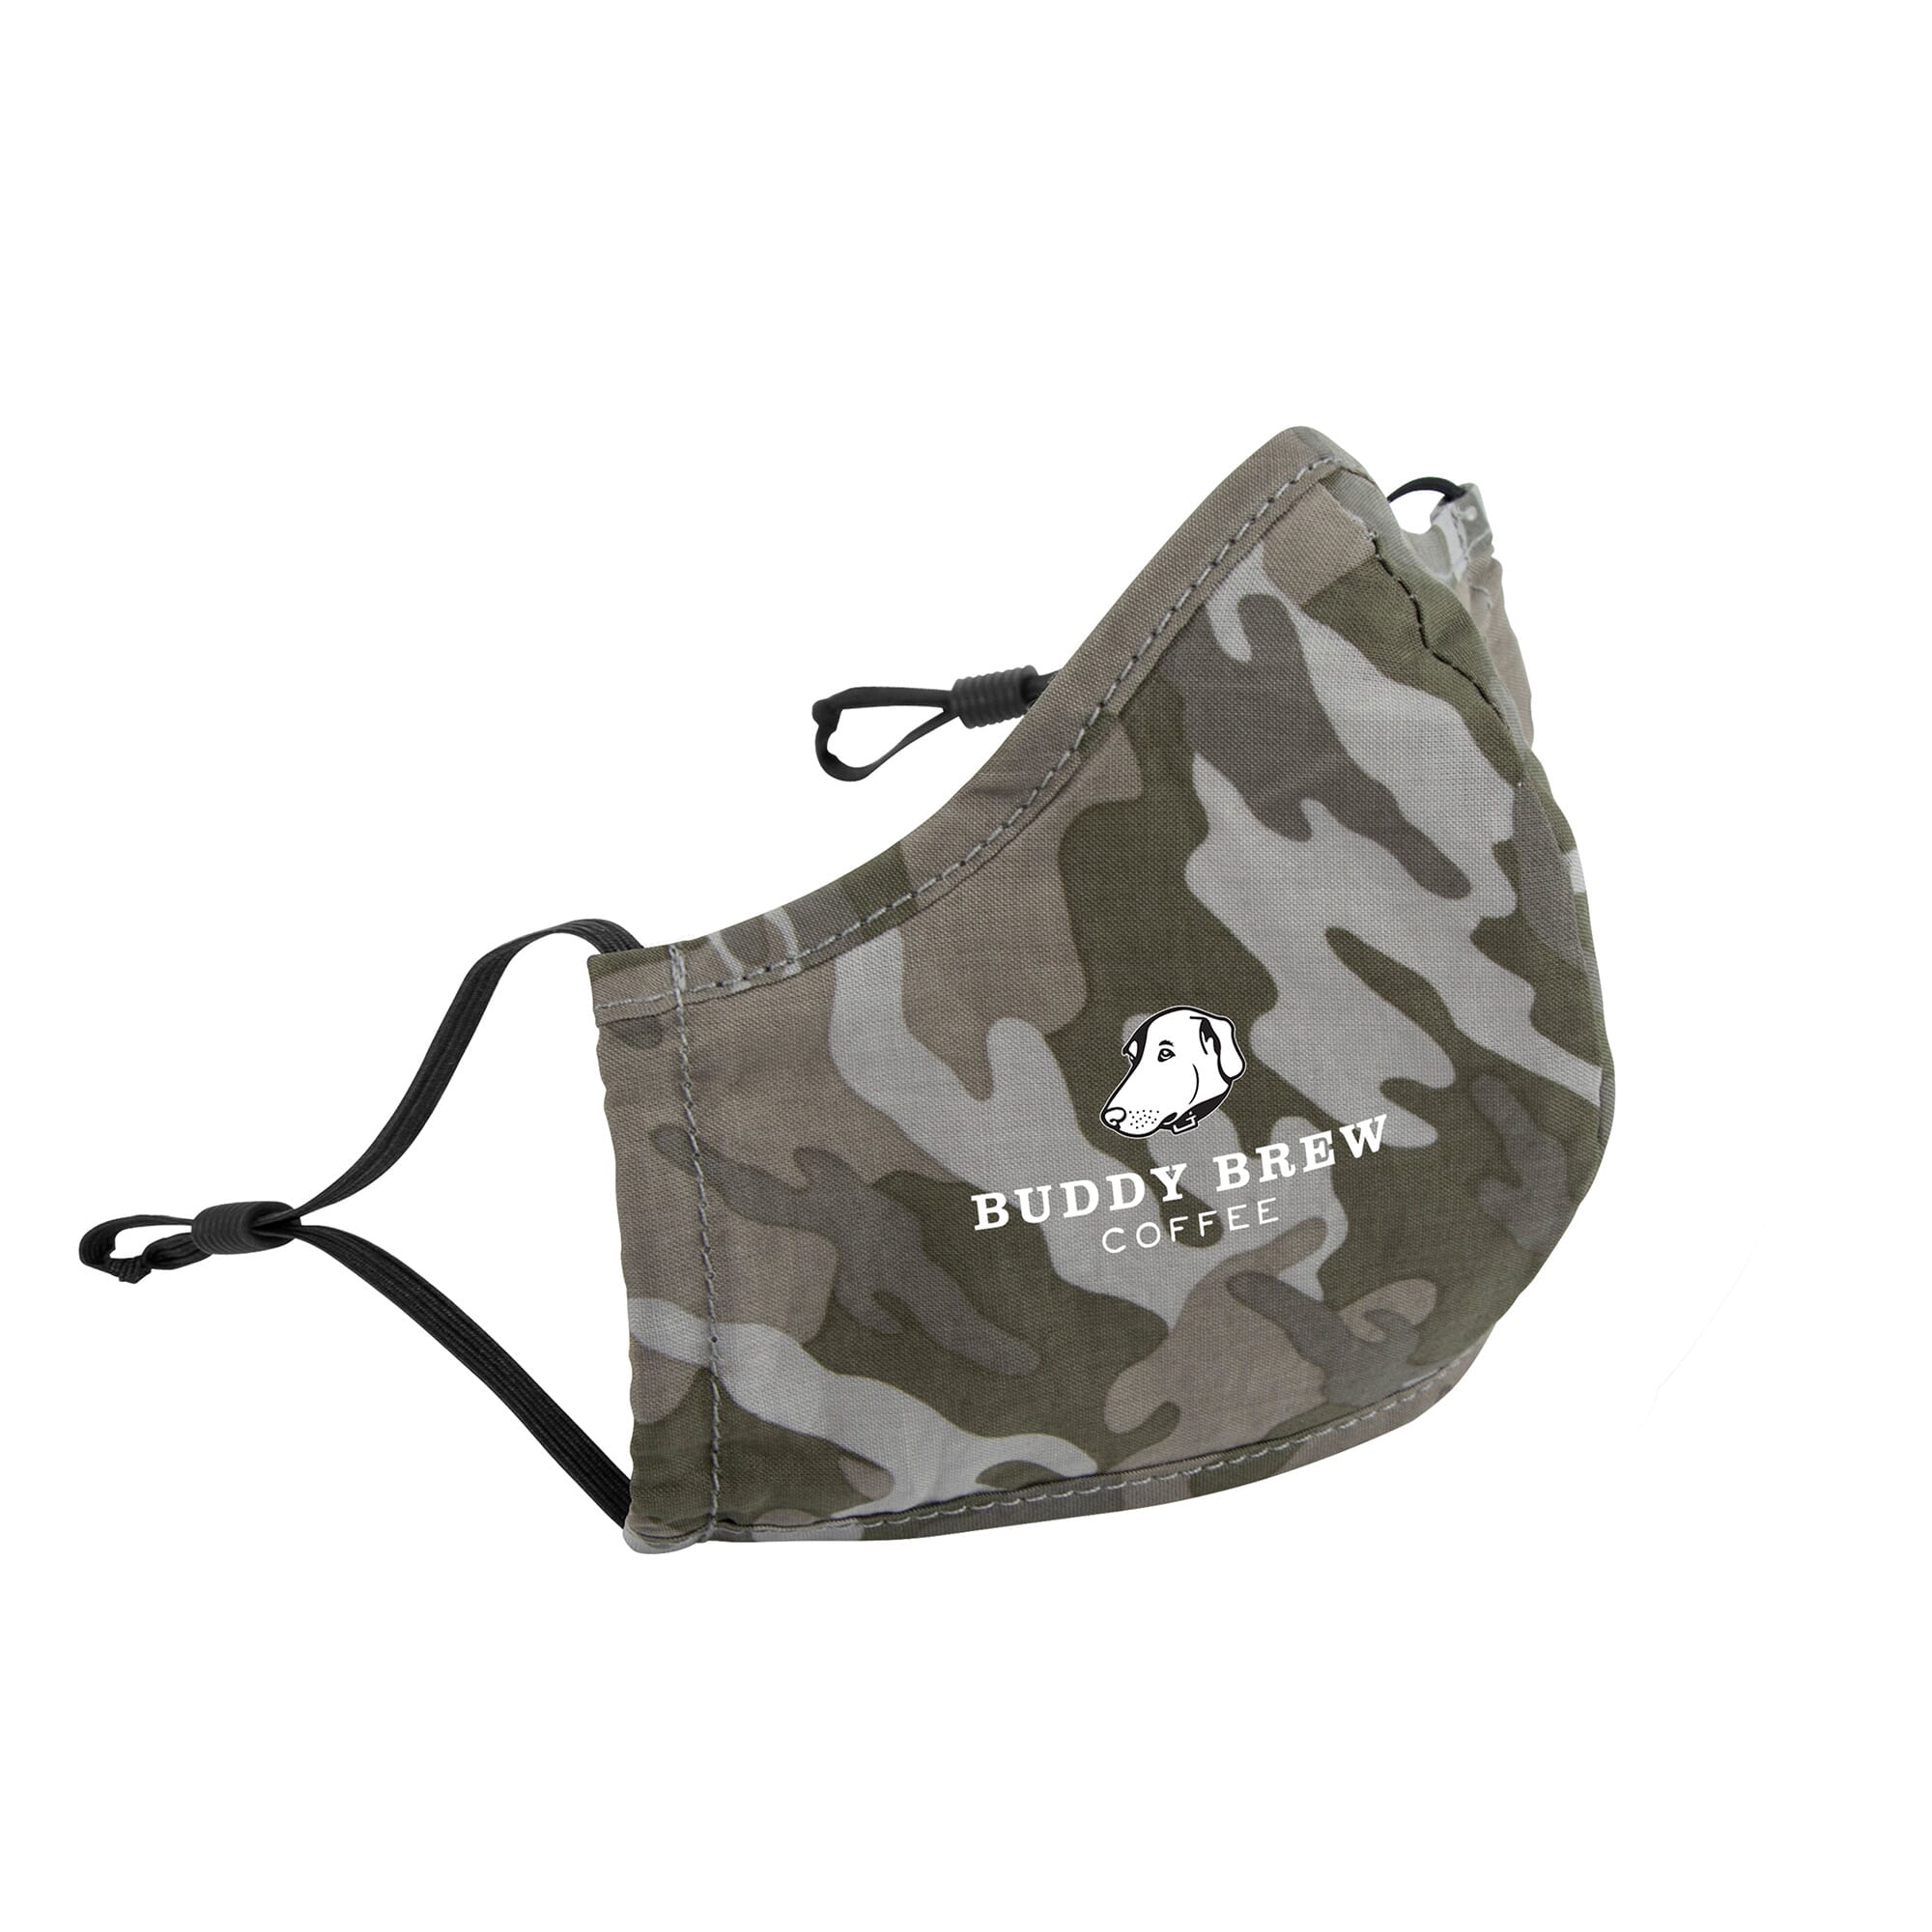 Reusable face mask with adjustable straps